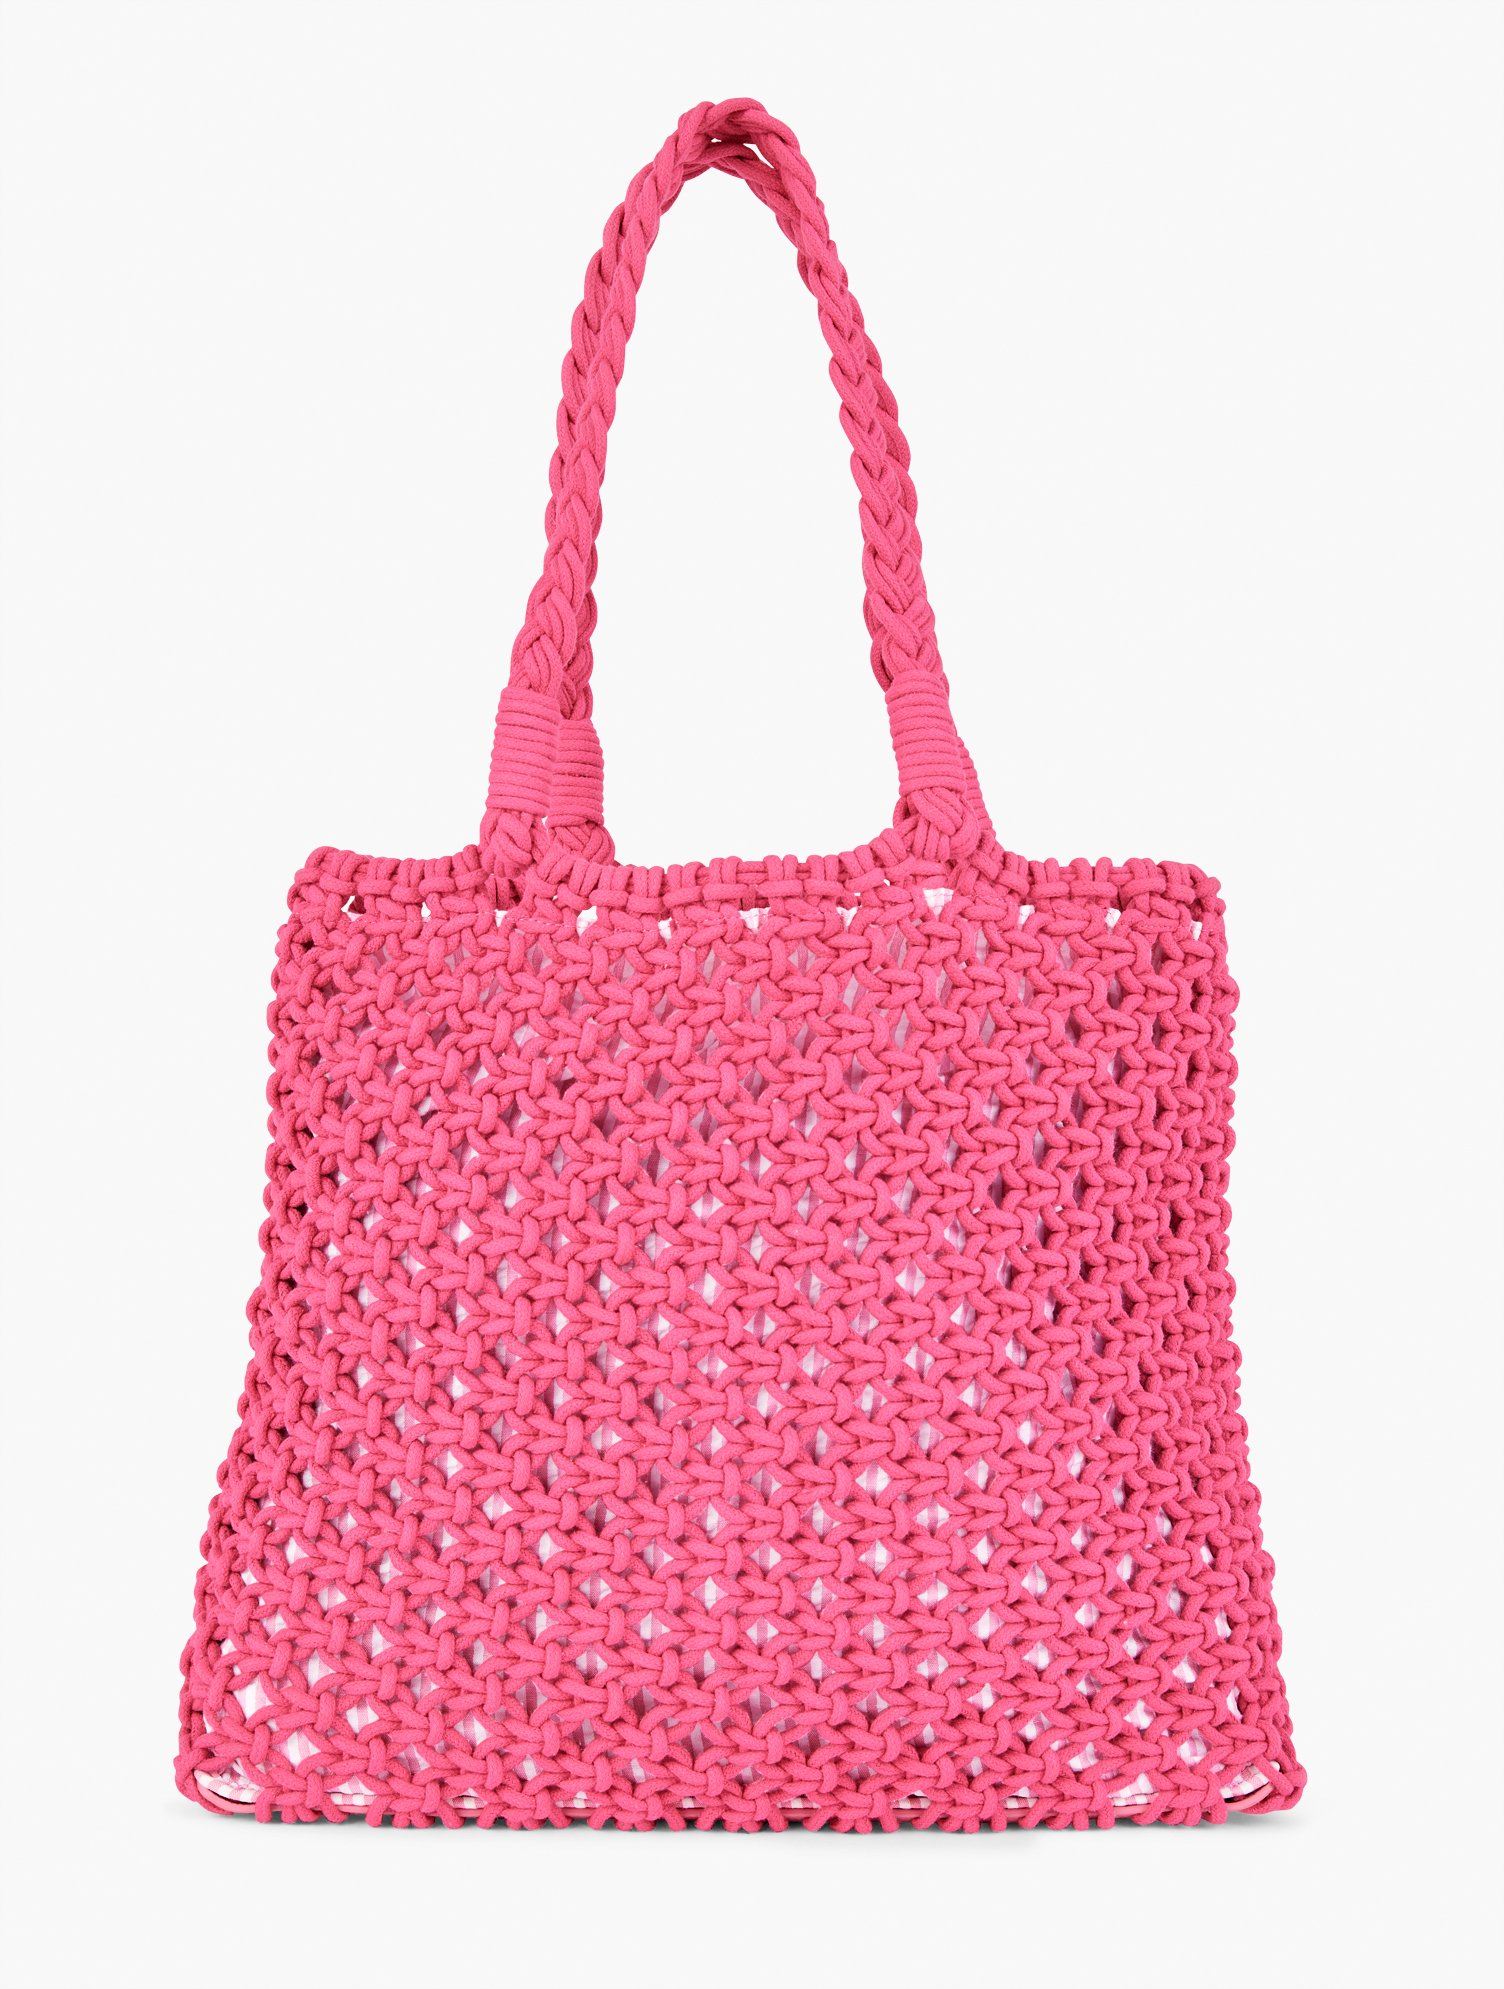 Shop Talbots Knotted Cord Tote - Aurora Pink - 001 - 100% Cotton